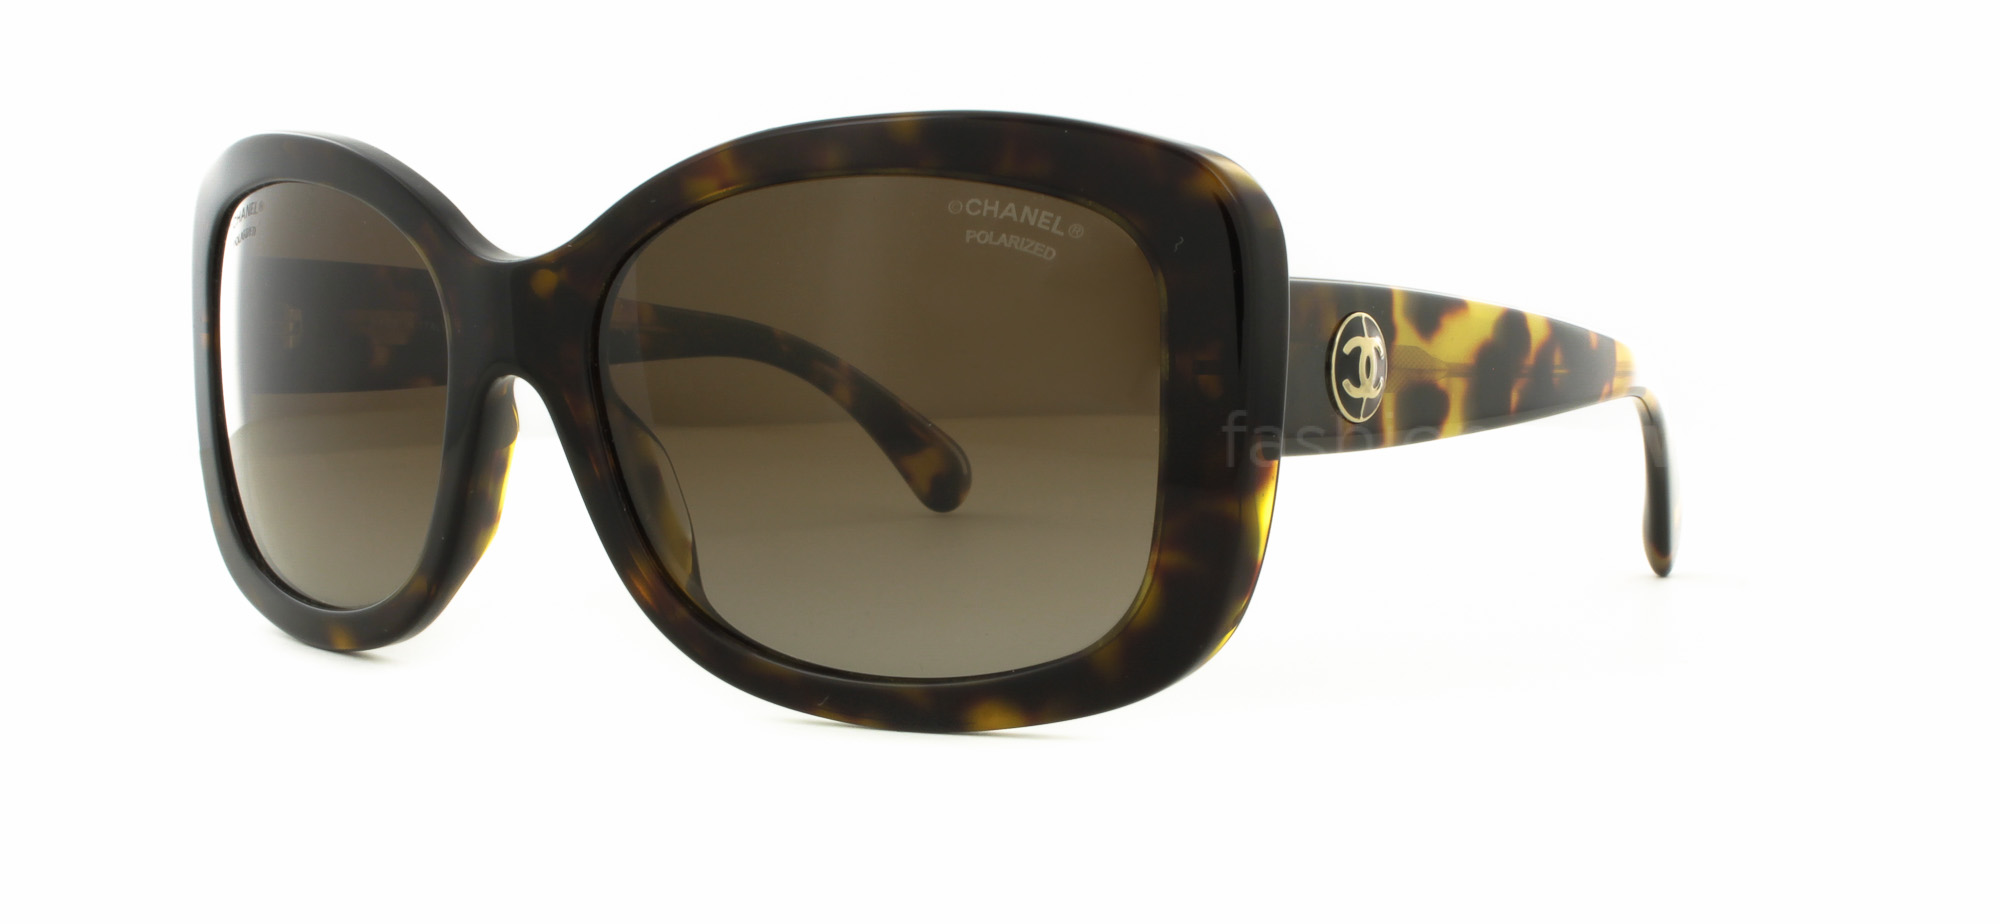 CHANEL 5322 1172S9